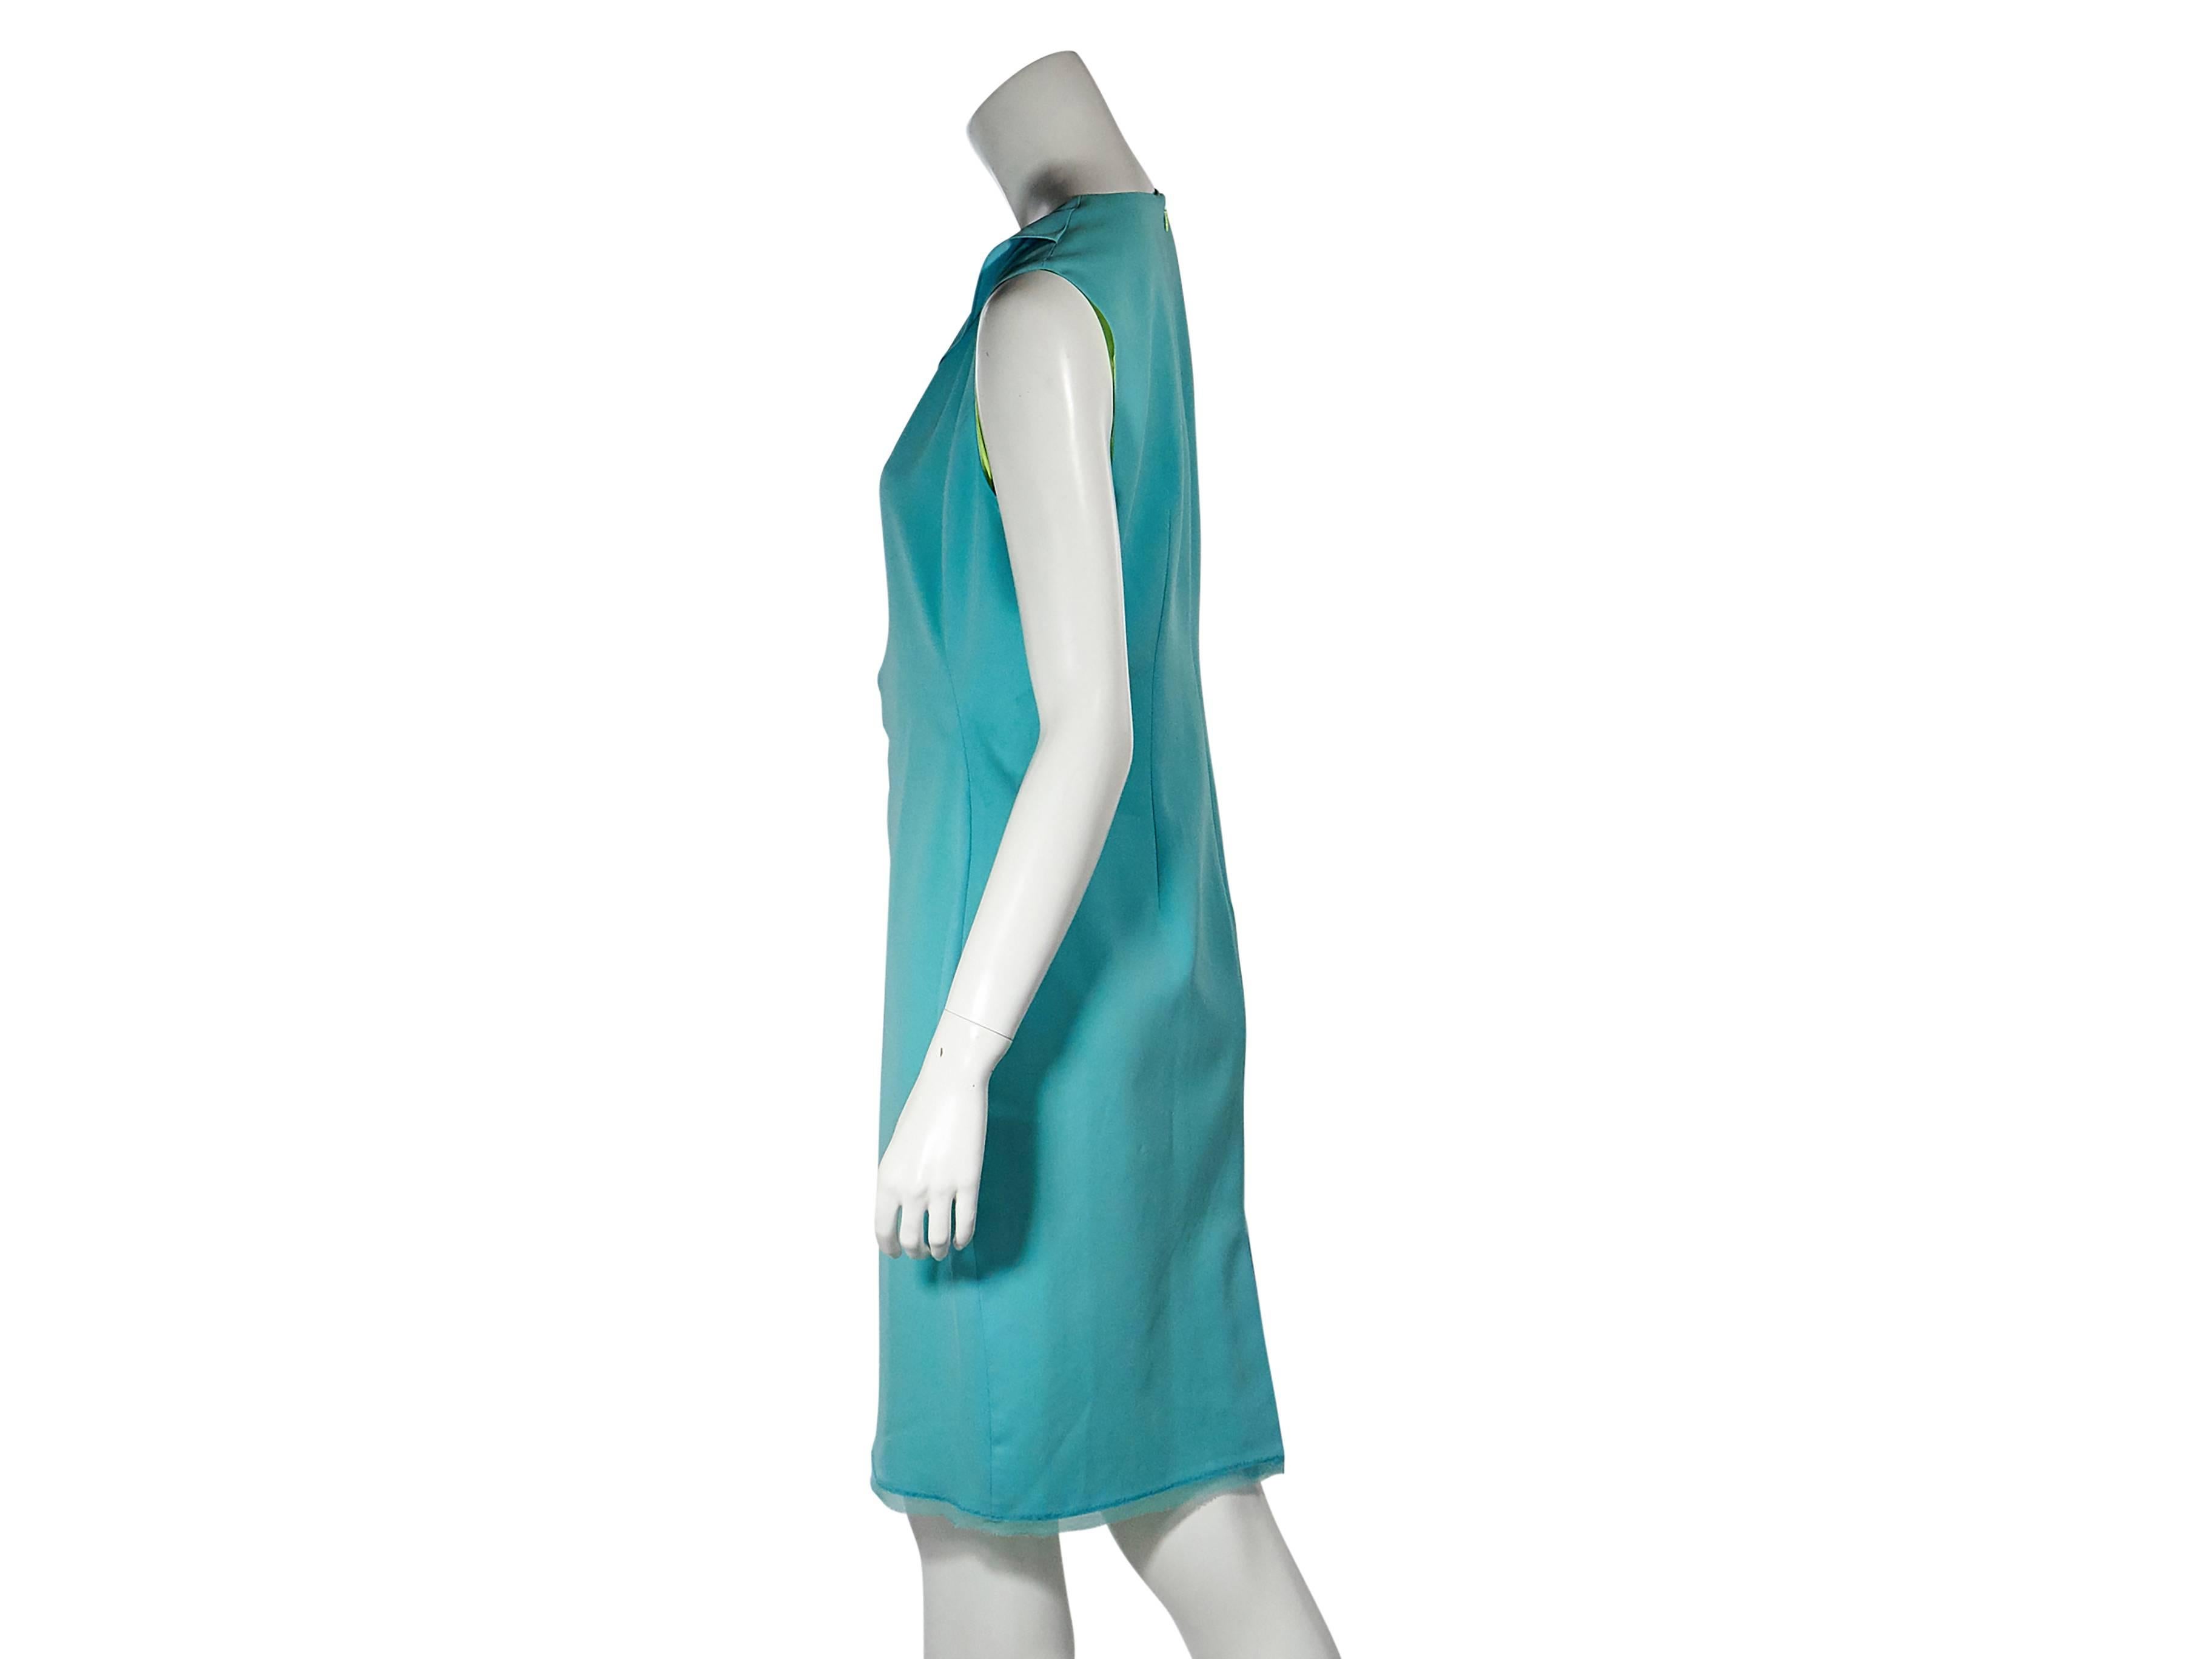 Product details: Teal sheath dress by Elie Tahari. Scoopneck. Sleeveless. Side gathering. Concealed back zip closure. Back hem vent. 
Condition: New with tags. 
Est. Retail $ 398.00